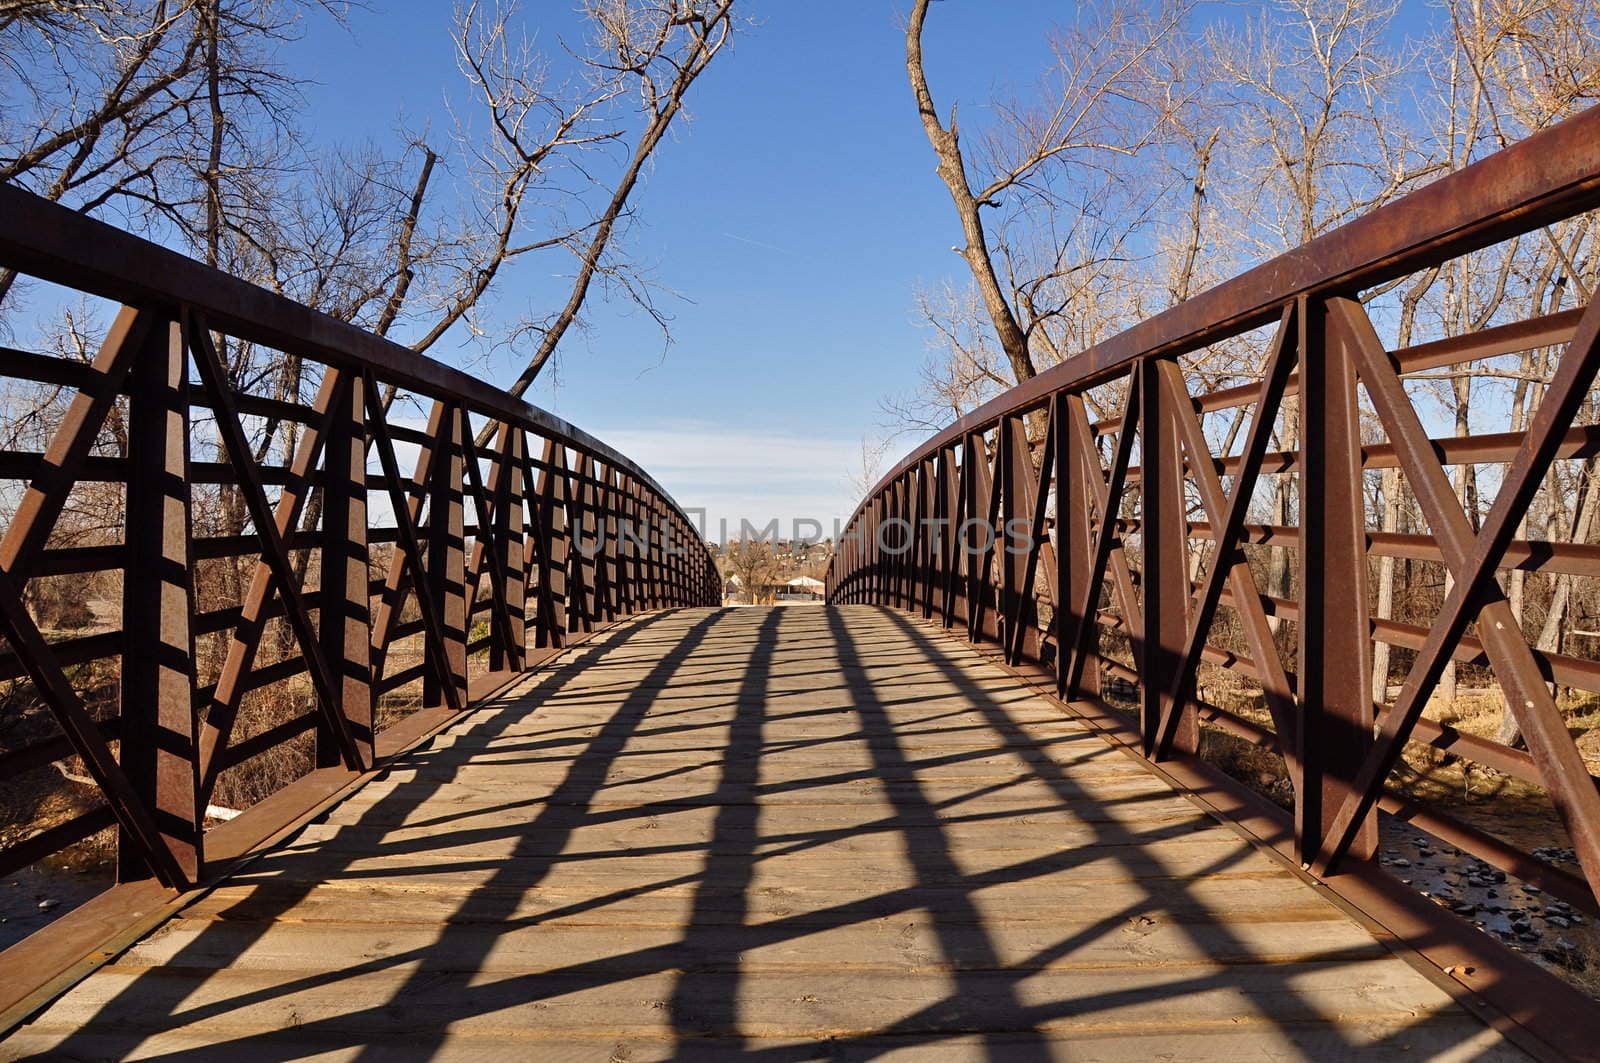 A wood and metal bridge extends out into the distance with trees, sky and copy space.